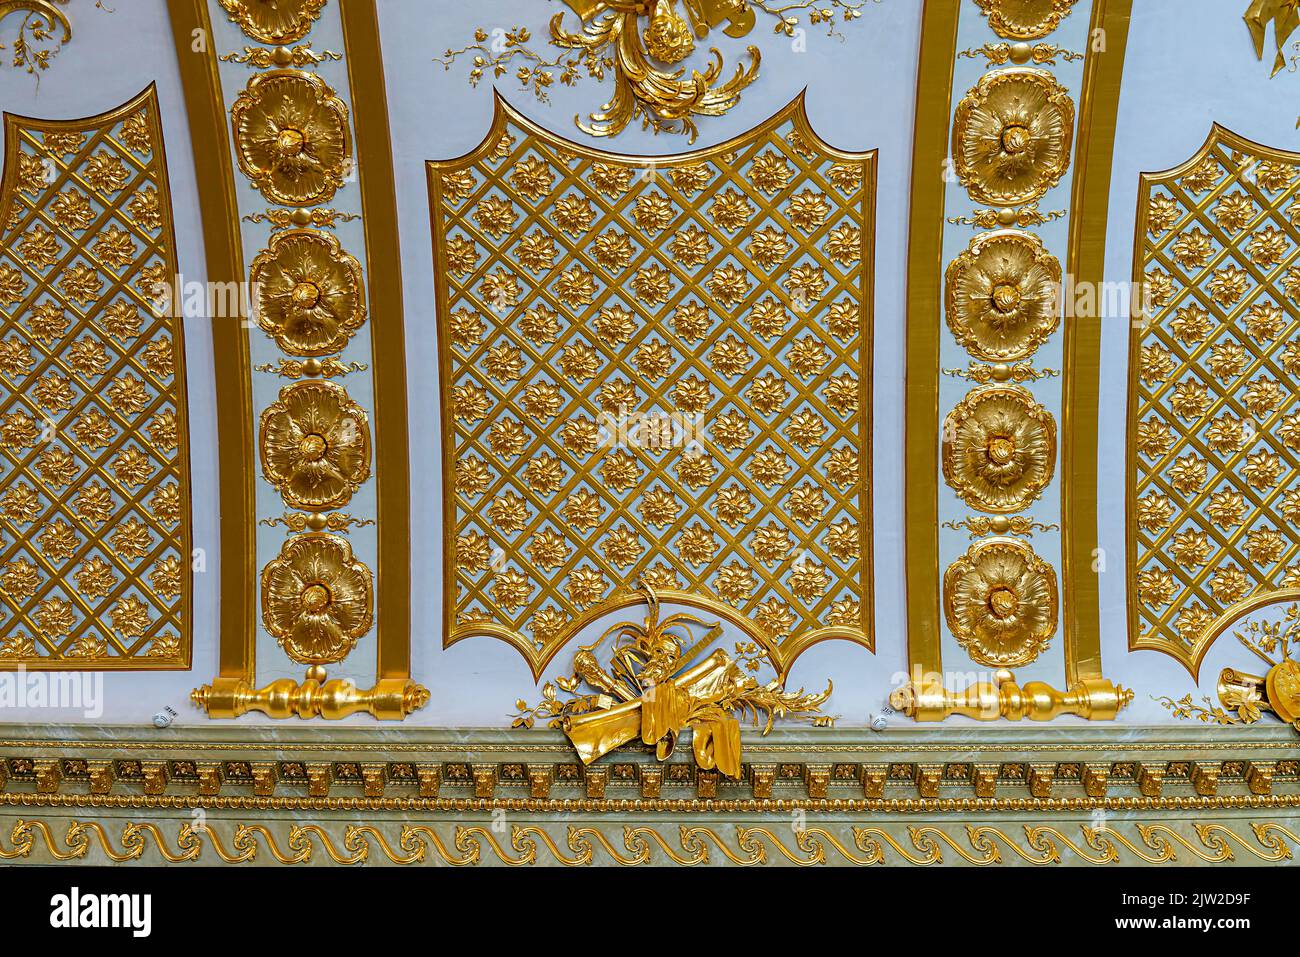 Ceiling vault with gilded ornaments in the Gallery Hall of the Picture Gallery in Sanssouci, Potsdam, Brandenburg, Germany Stock Photo